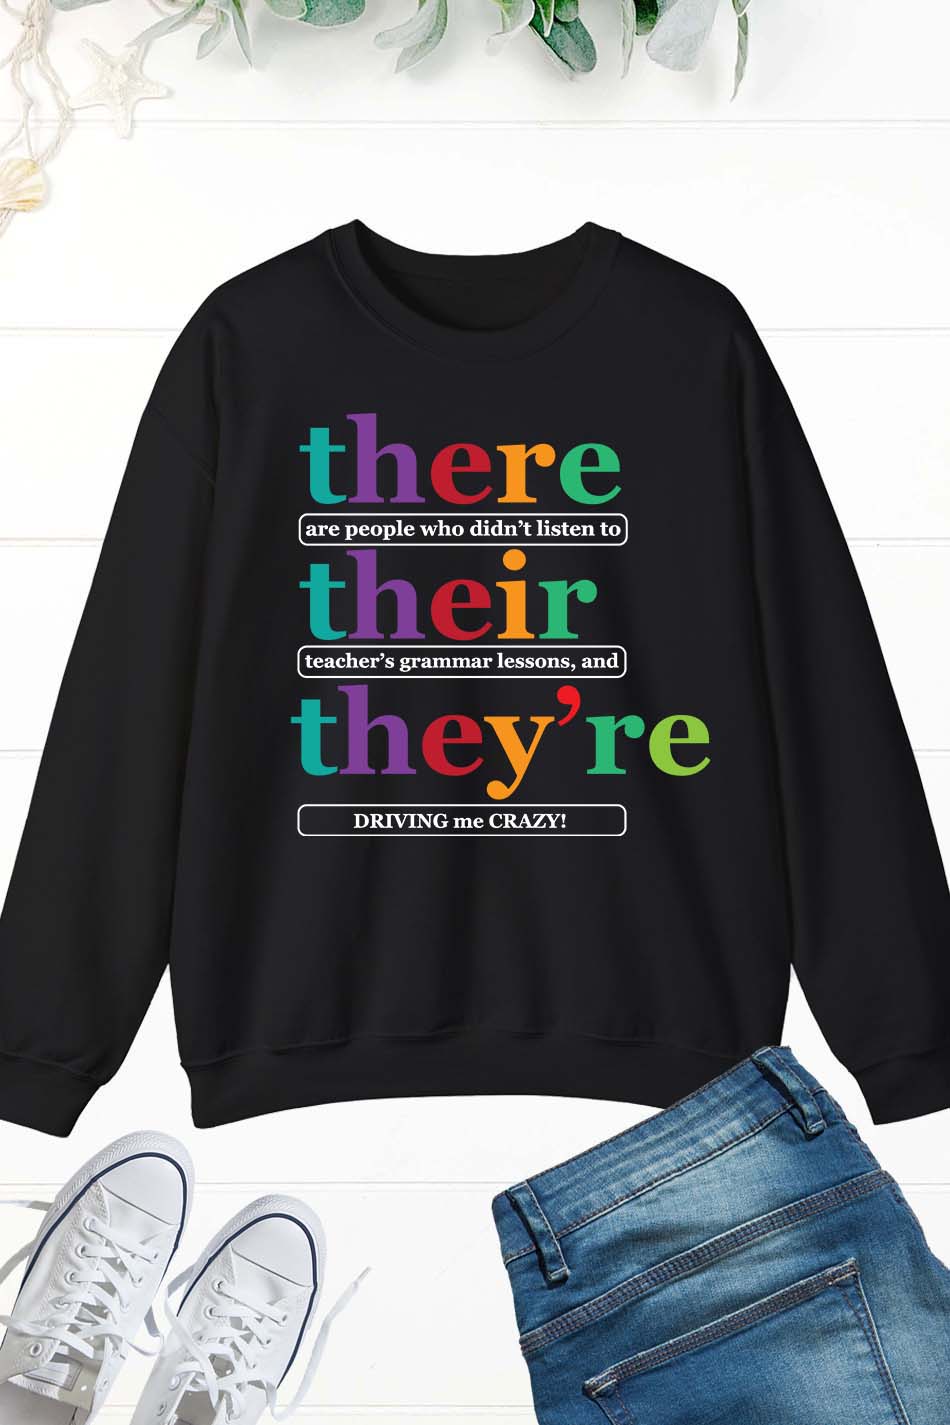 There Their They're English Literary Teacher Sweatshirt